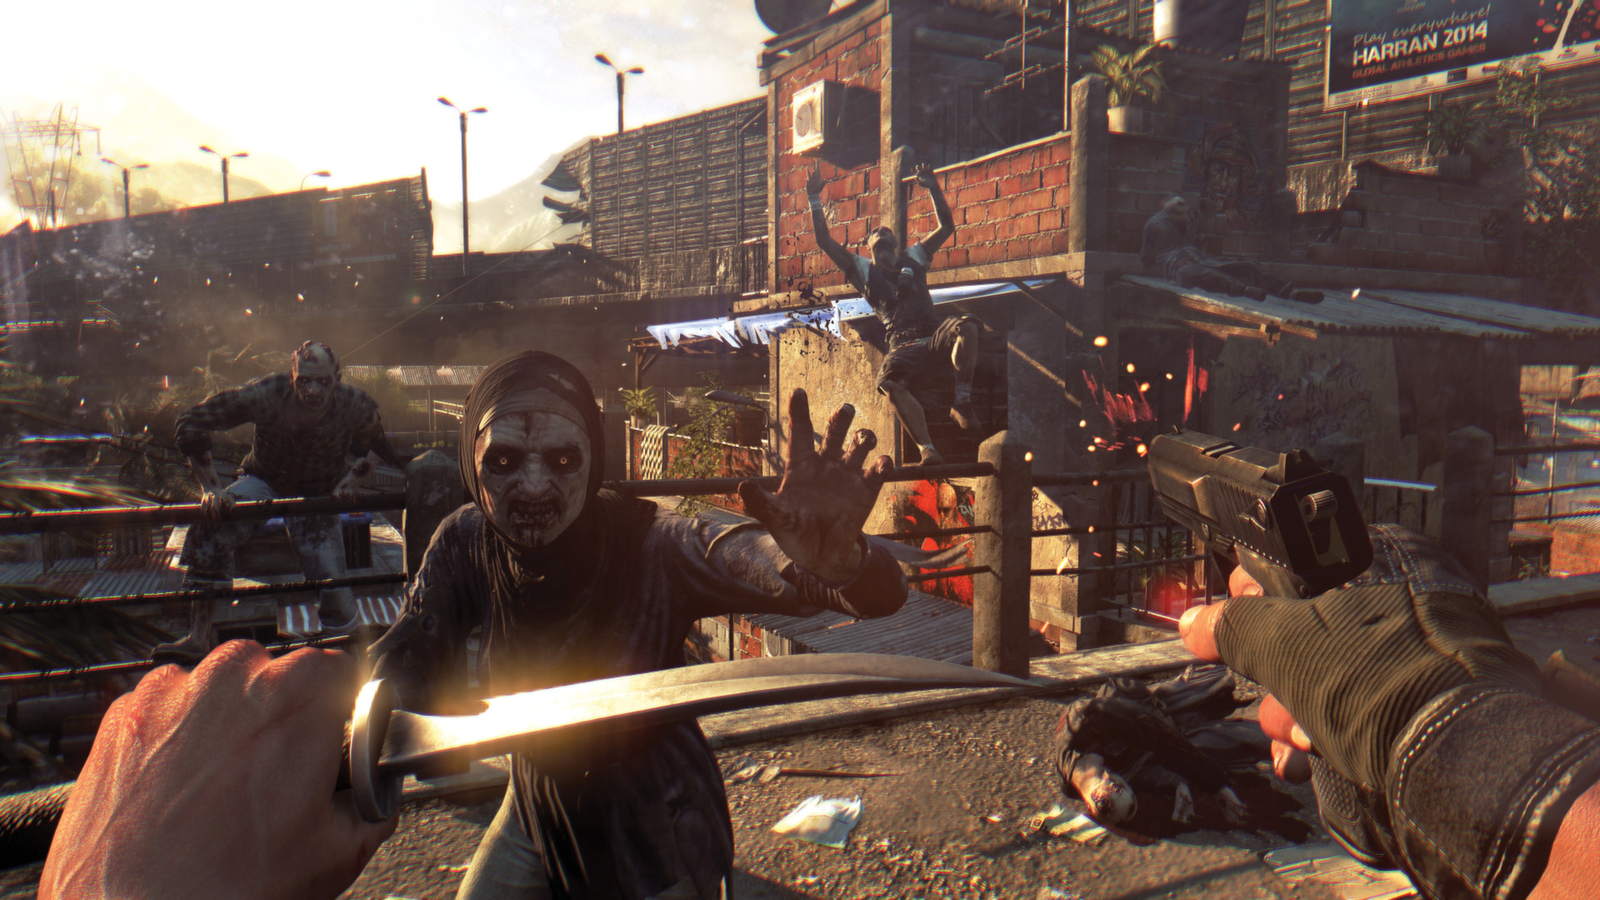 Dying Light 2 Will Feature All-New Characters; Have References to